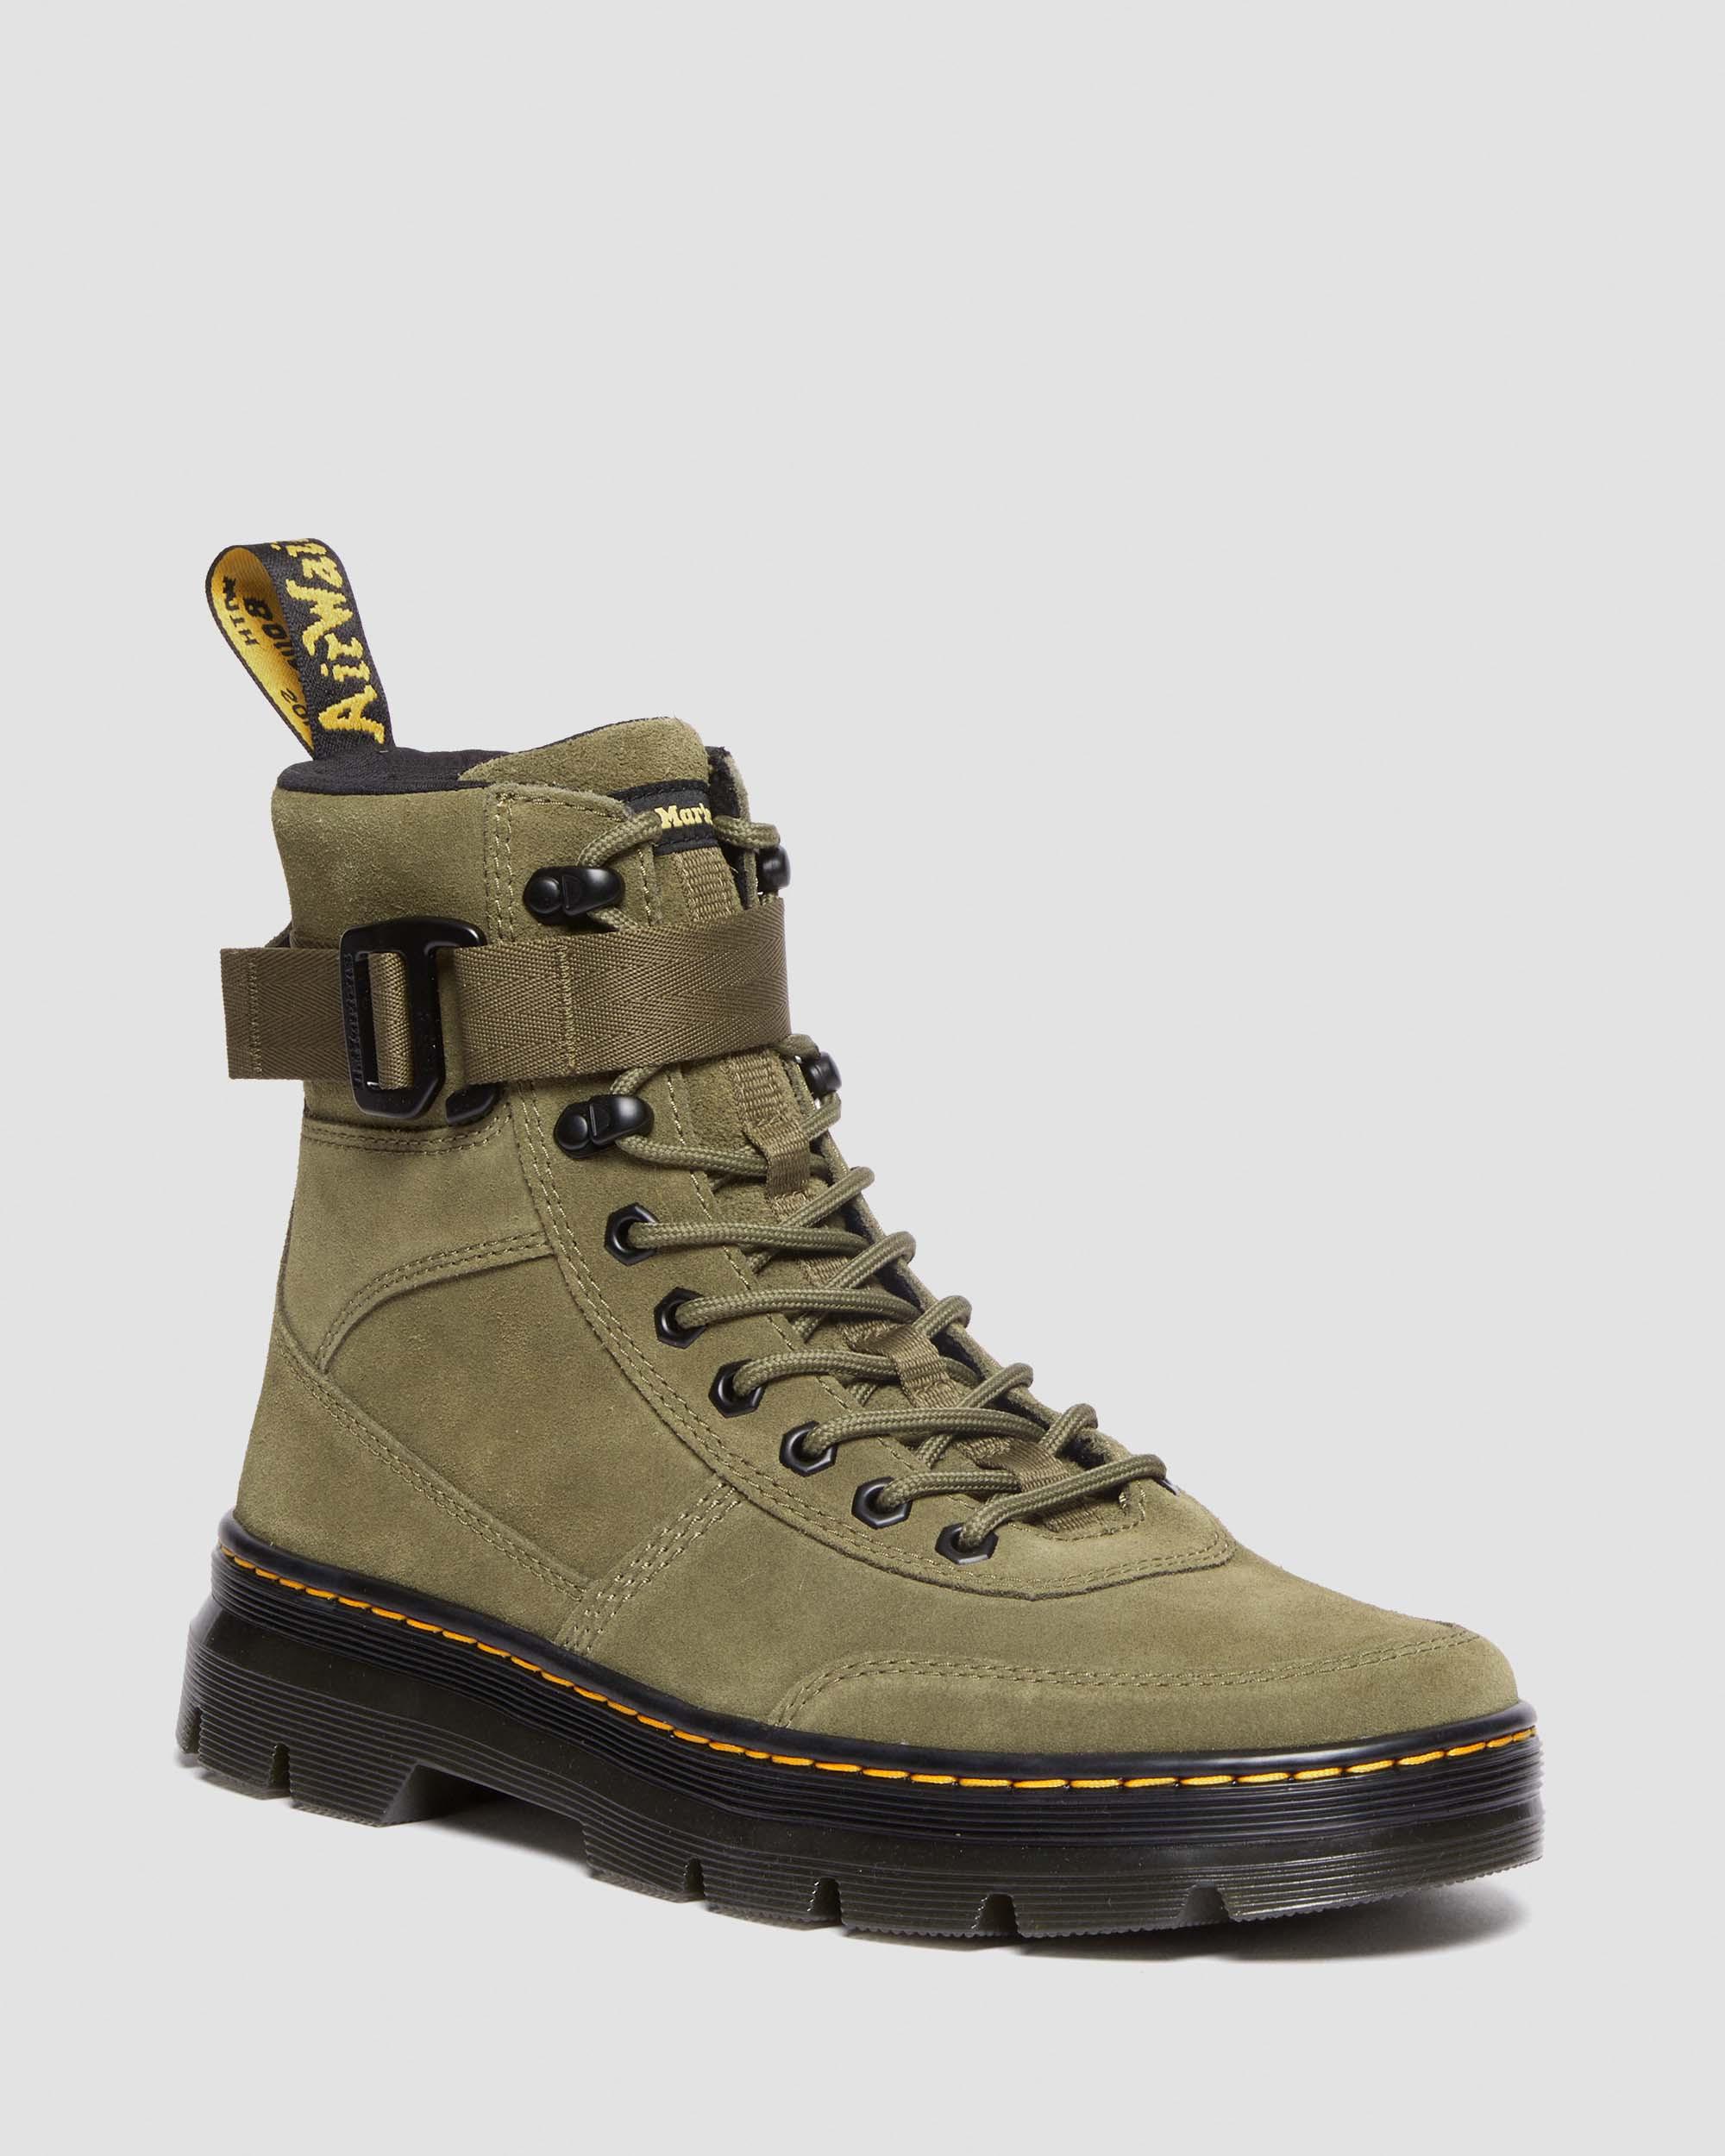 Combs Tech Canvas & Suede Utility Boots in DMS OLIVE